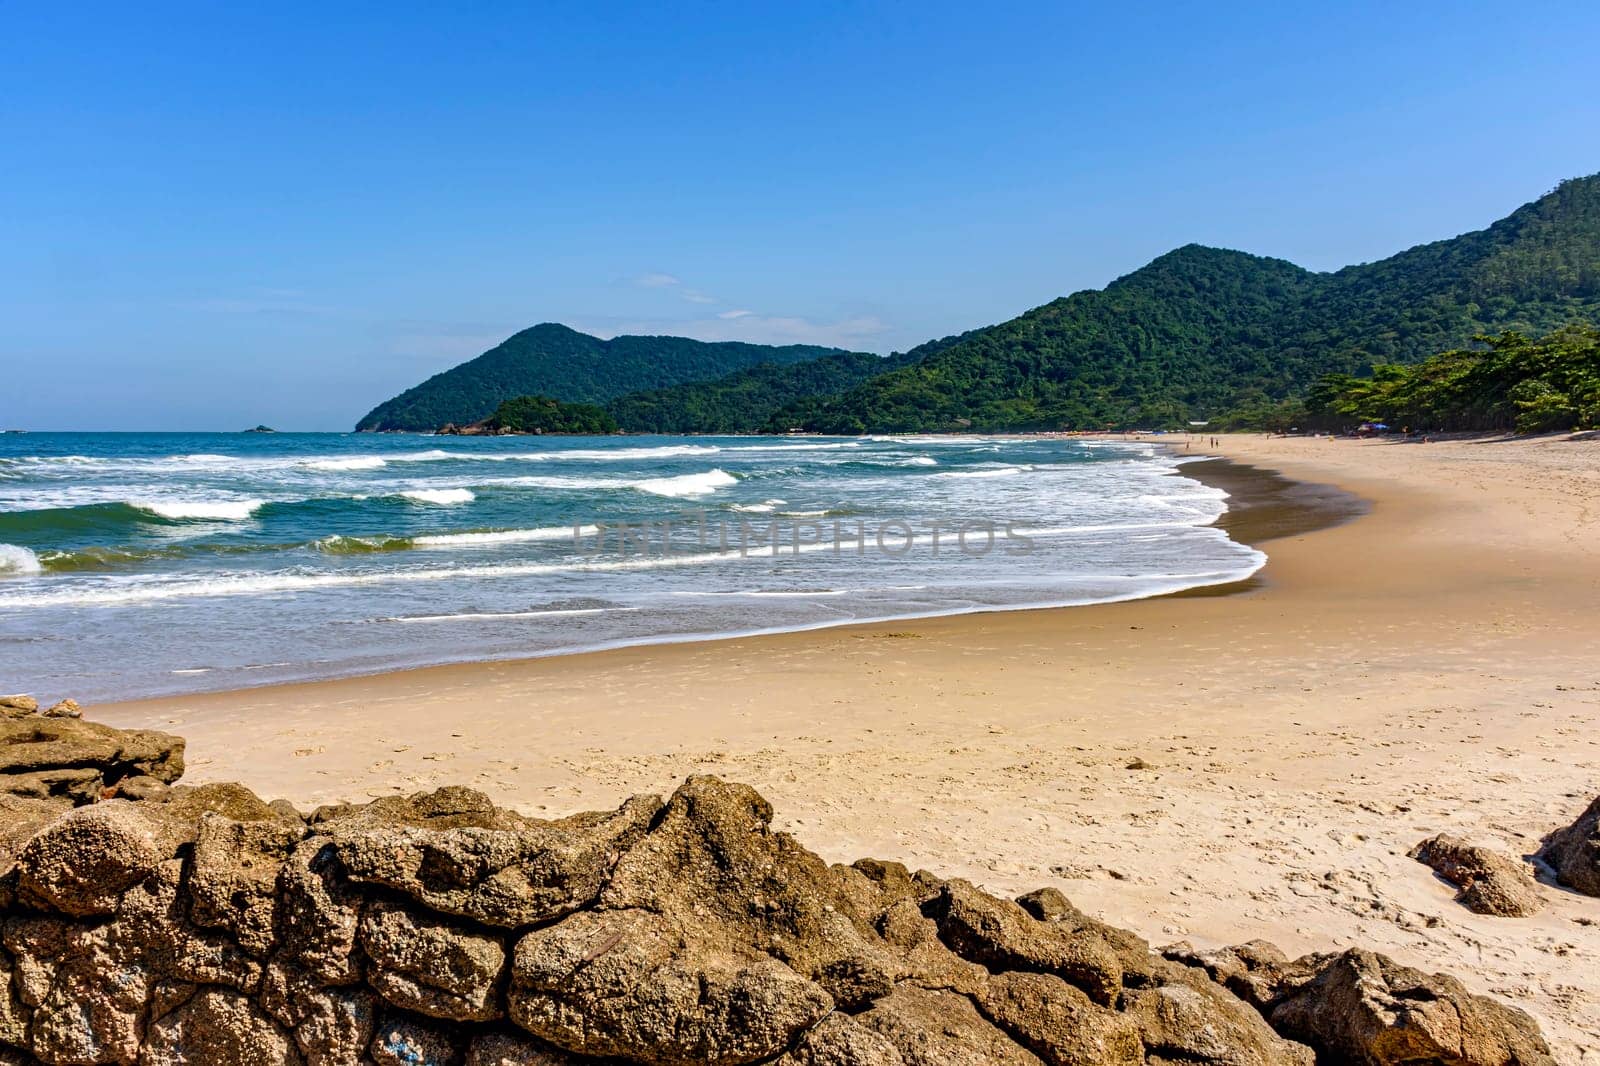 Beautiful tropical beach surrounded by rainforest on the coast of Sao Paulo state, Brazil